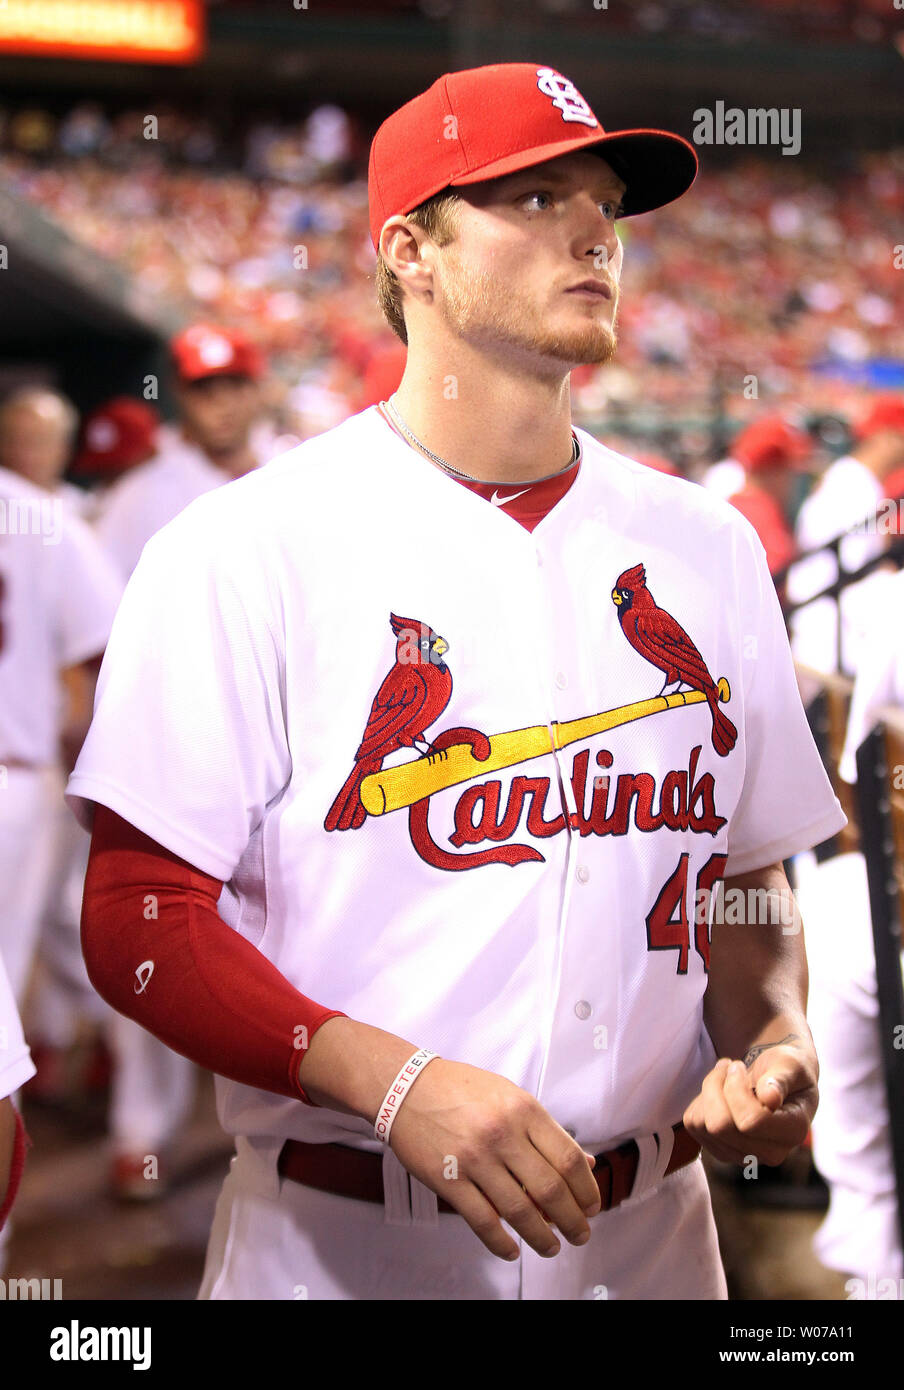 St Louis Cardinals Pitcher Shelby Miller Stands In The Dugout Wearing A Sleeve On His Throwing Arm During A Game Against The Los Angeles Dodgers At Busch Stadium In St Louis On